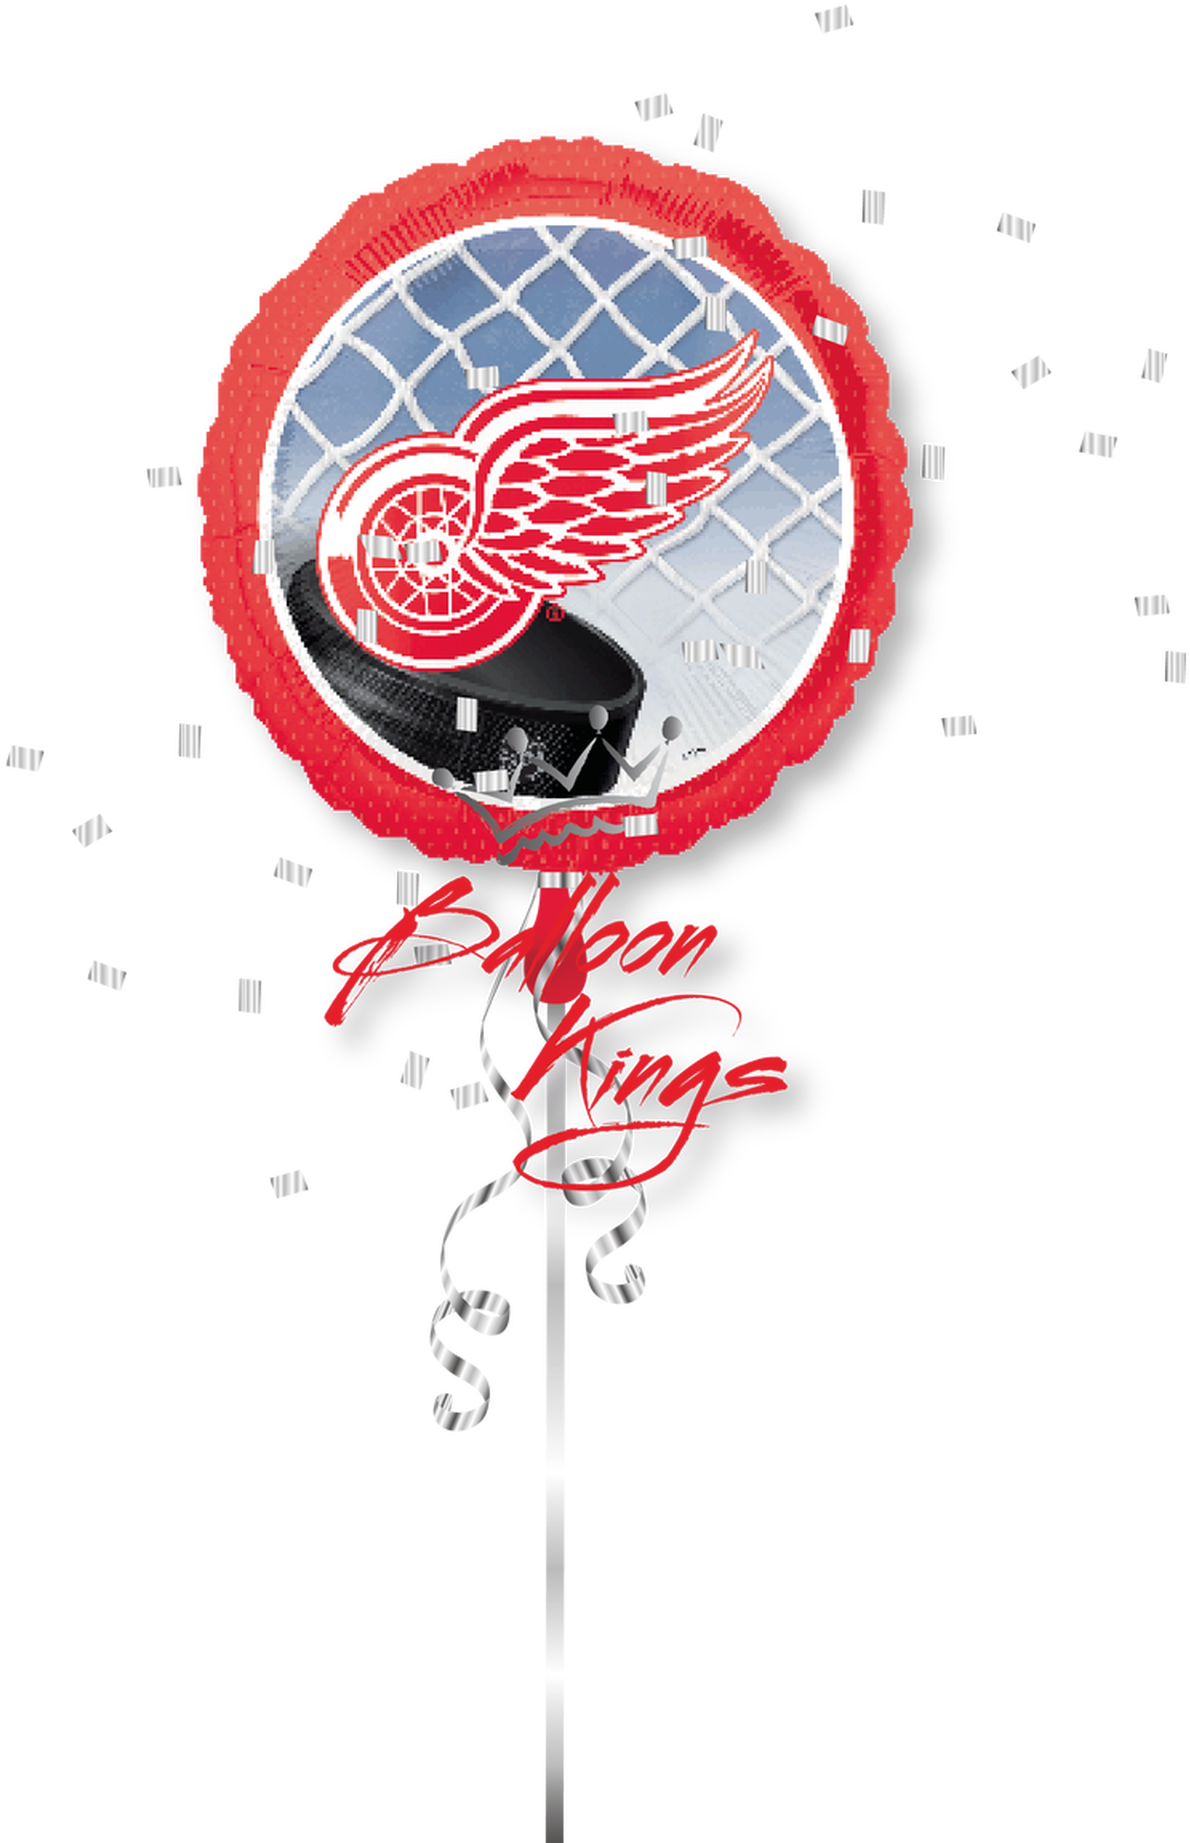 A Red And White Balloon With A Hockey Puck And A Hockey Puck On A Stick